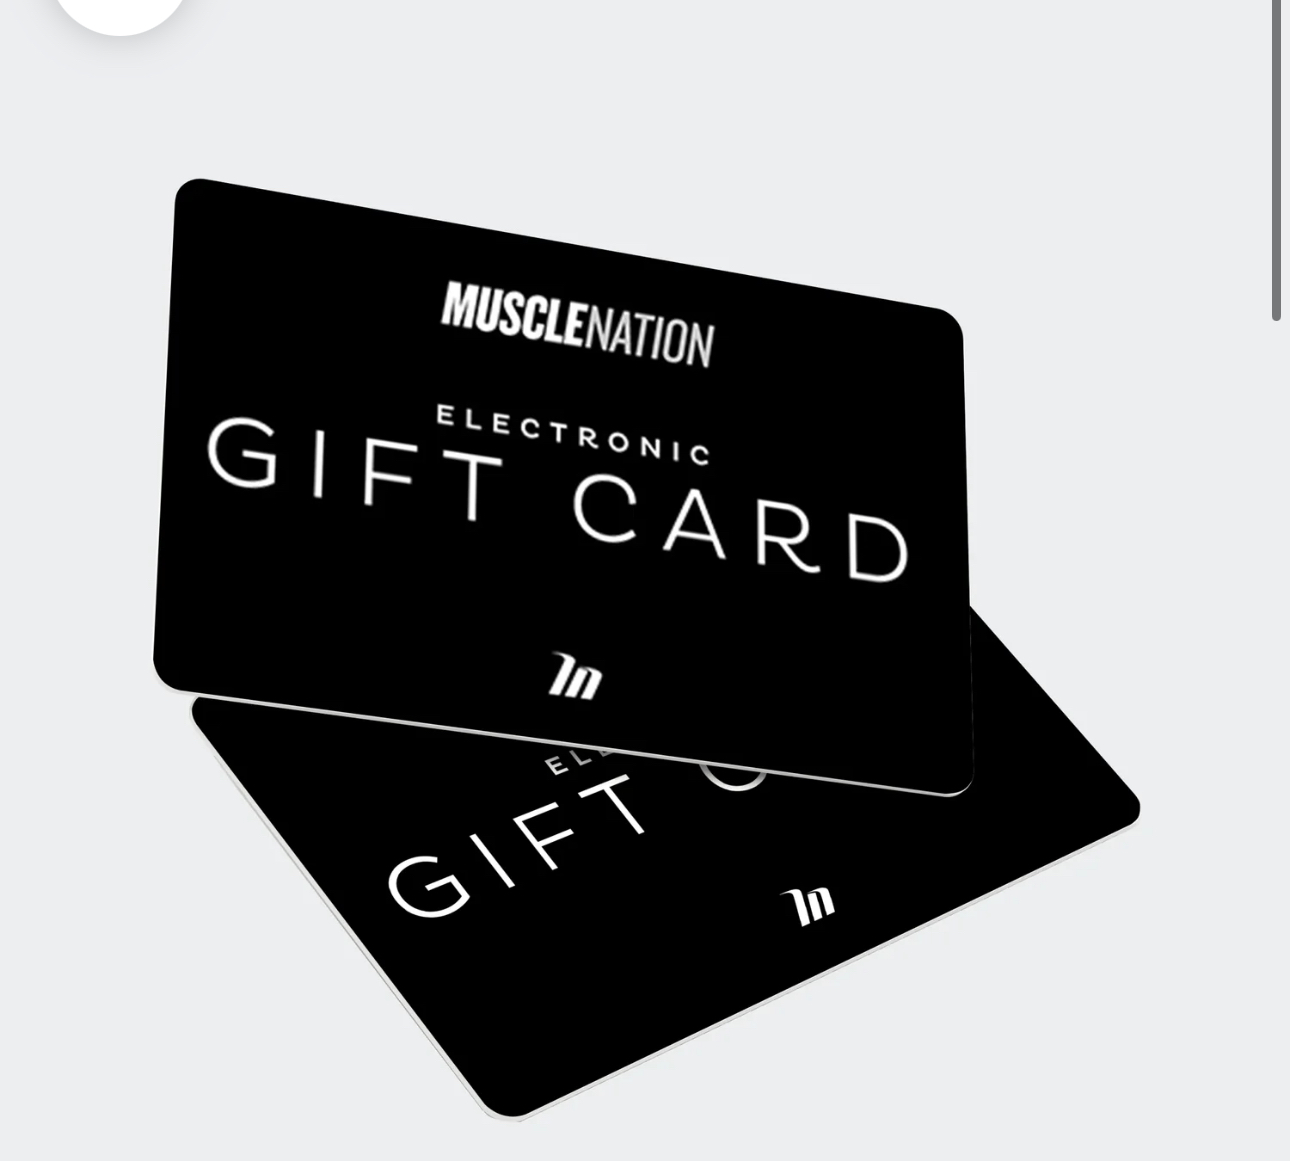 Muscle Nation GiftCard